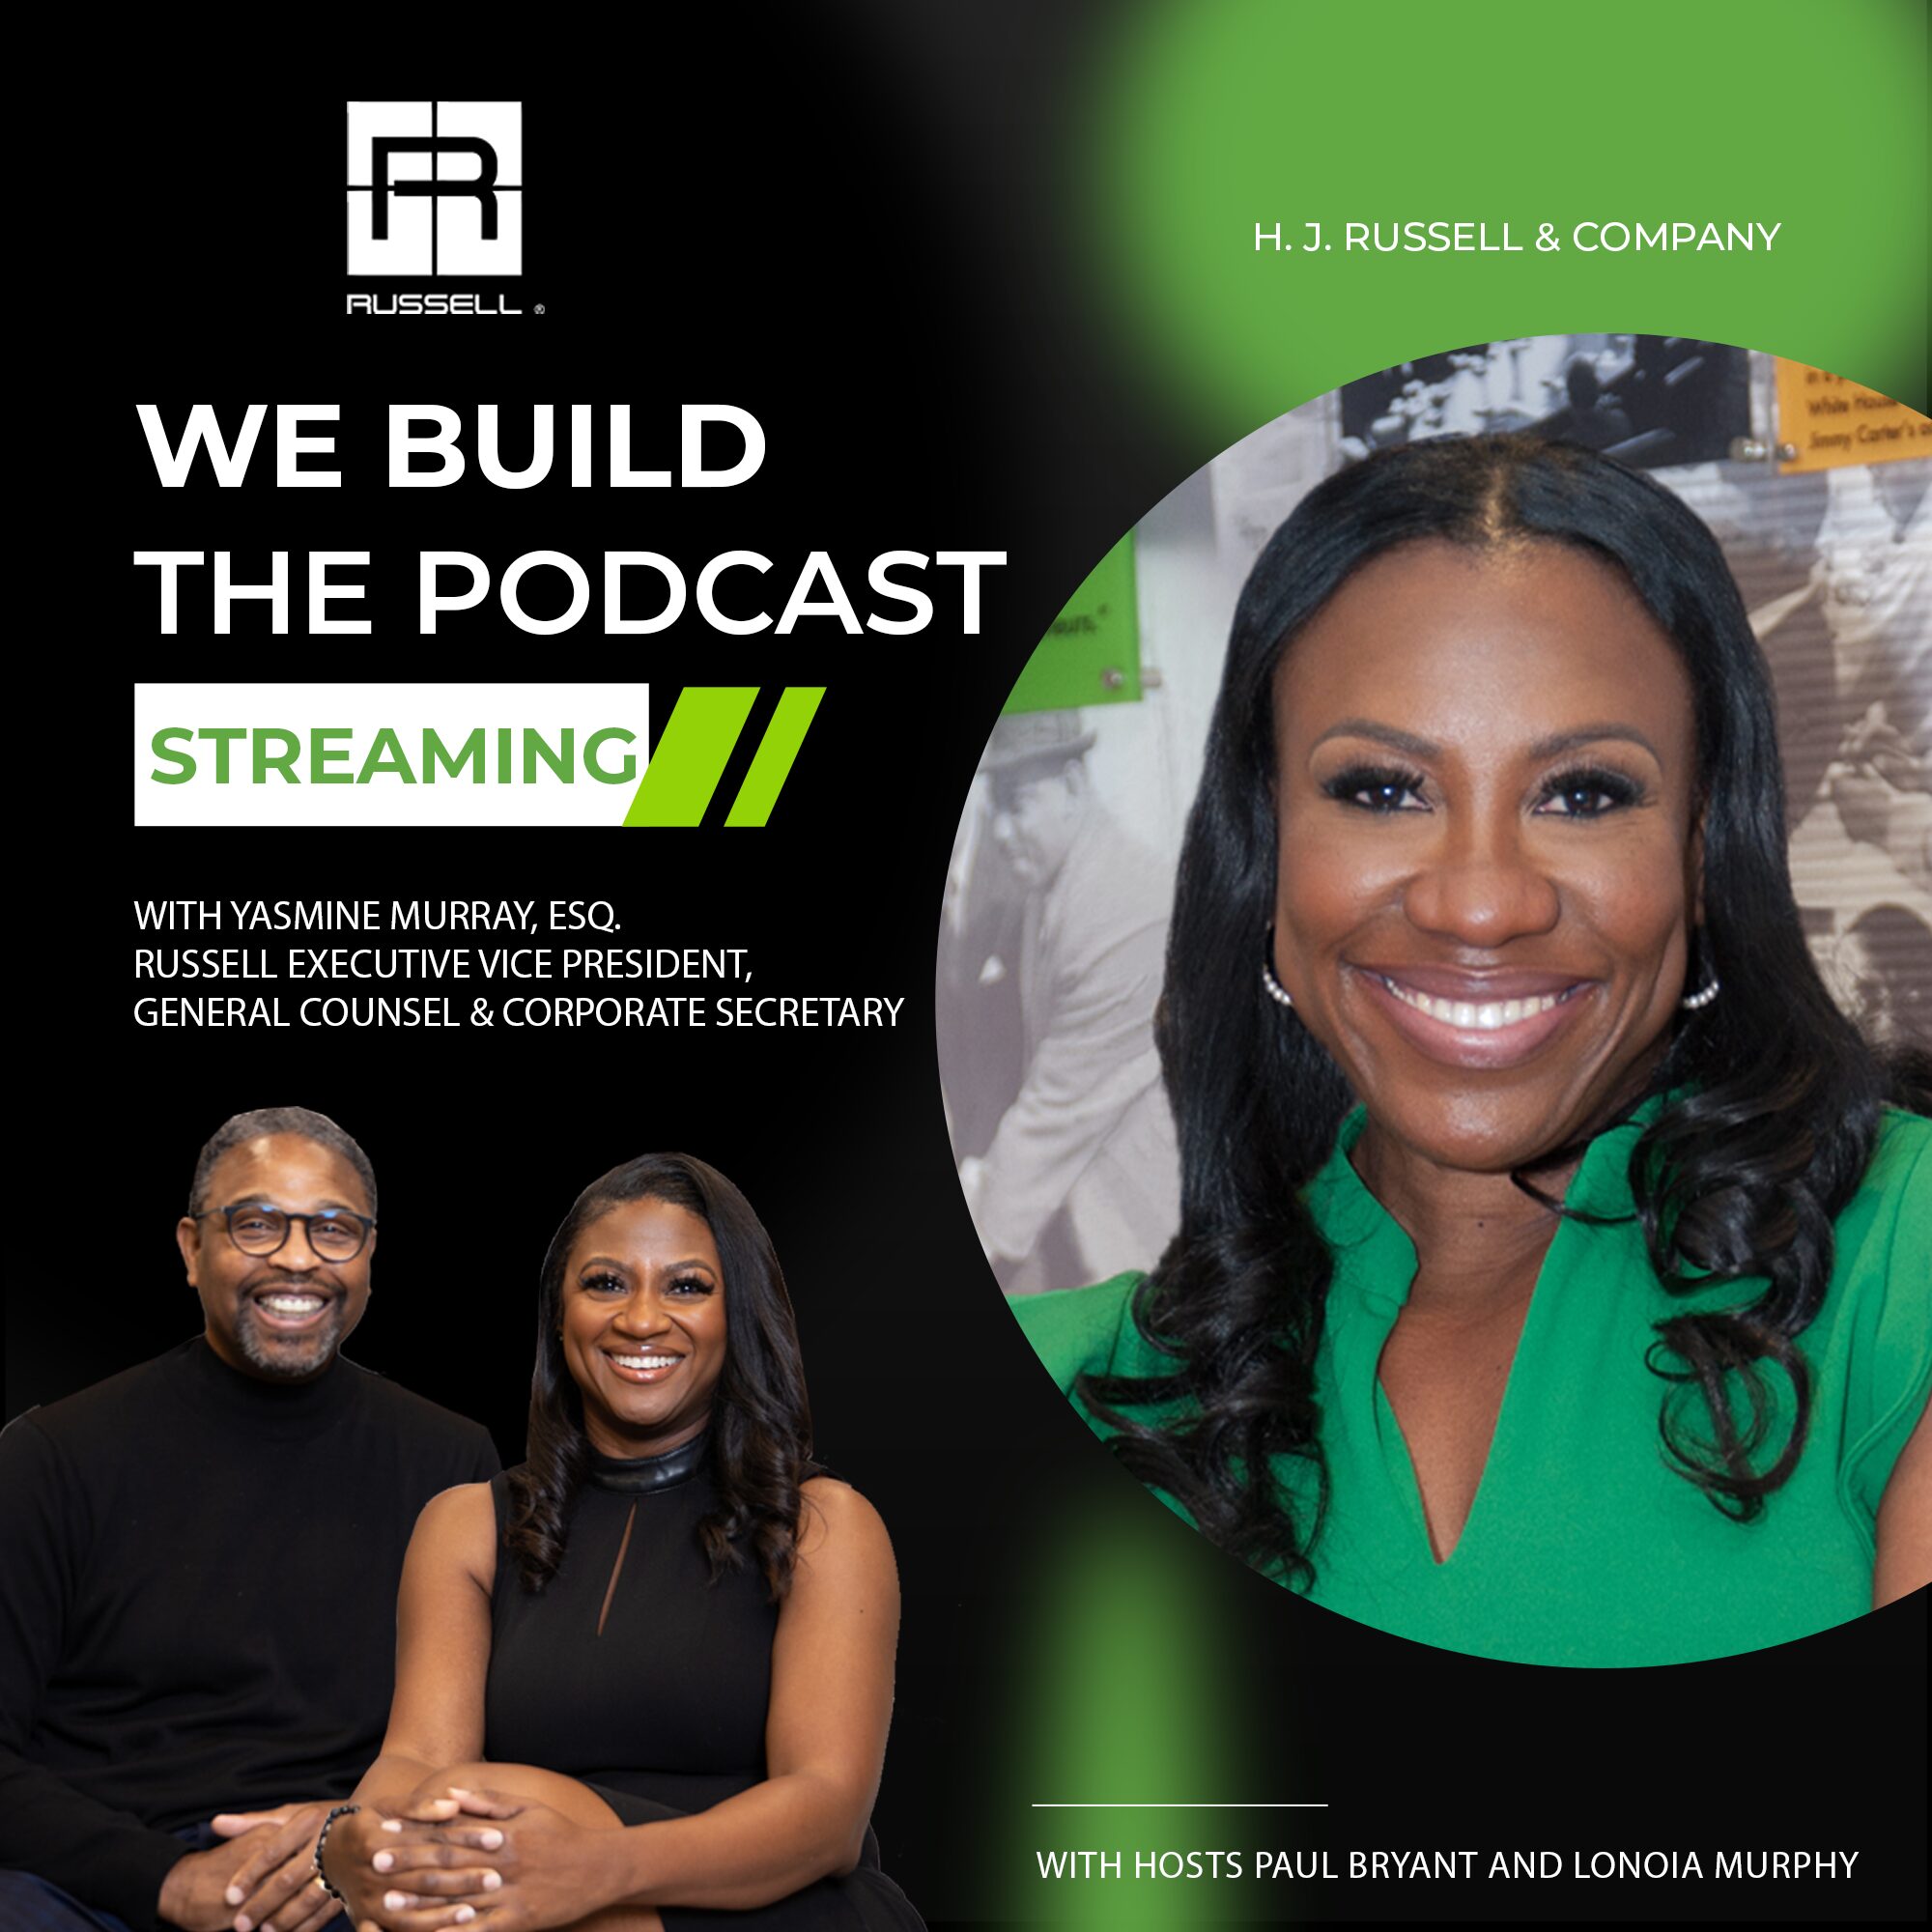 Yasmine Murray shares what motivates her: Meaningful projects, supporting others, and helping to continue the H. J. Russell & Company legacy on We Build: The Podcast